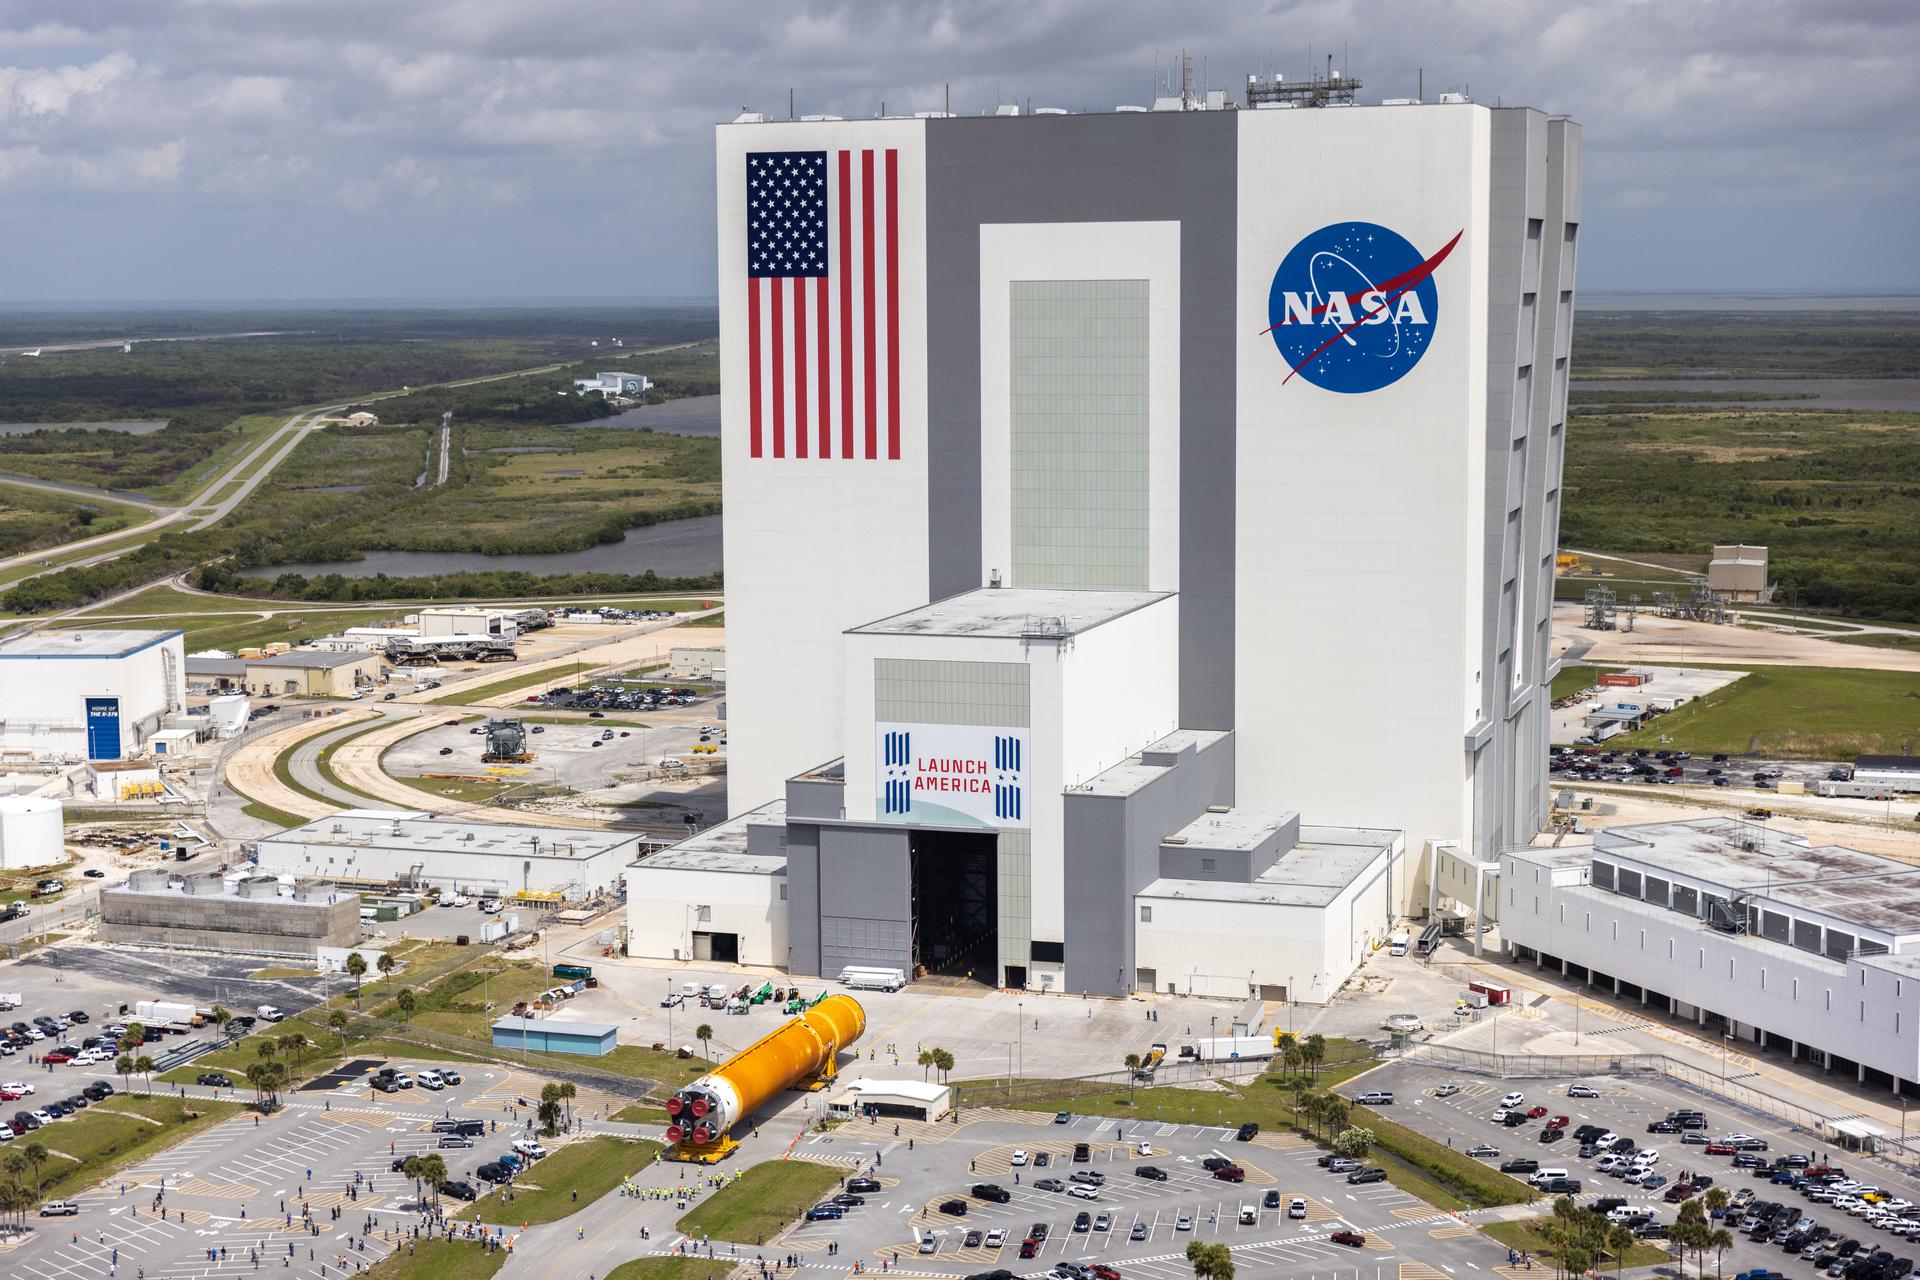 Kennedy Space Center's Vehicle Assembly Building